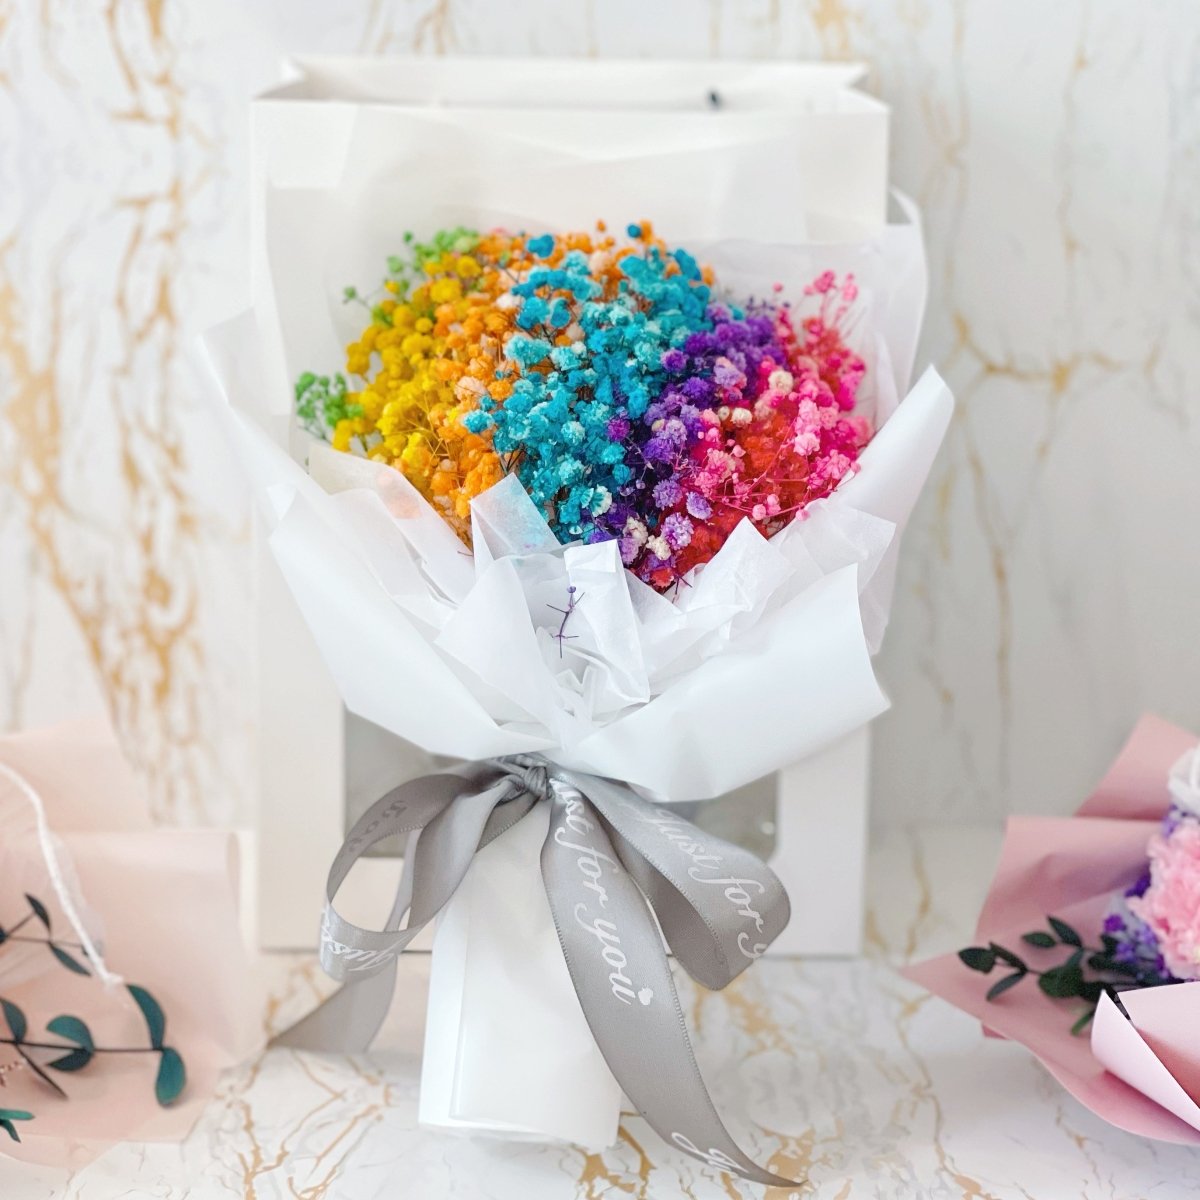 Rainbow Baby Breath - Everlasting Flower Bouquet (Real Preserved Roses and Dried Flowers) - Rainbowly Fresh Fruit Gift and Flower Arrangments